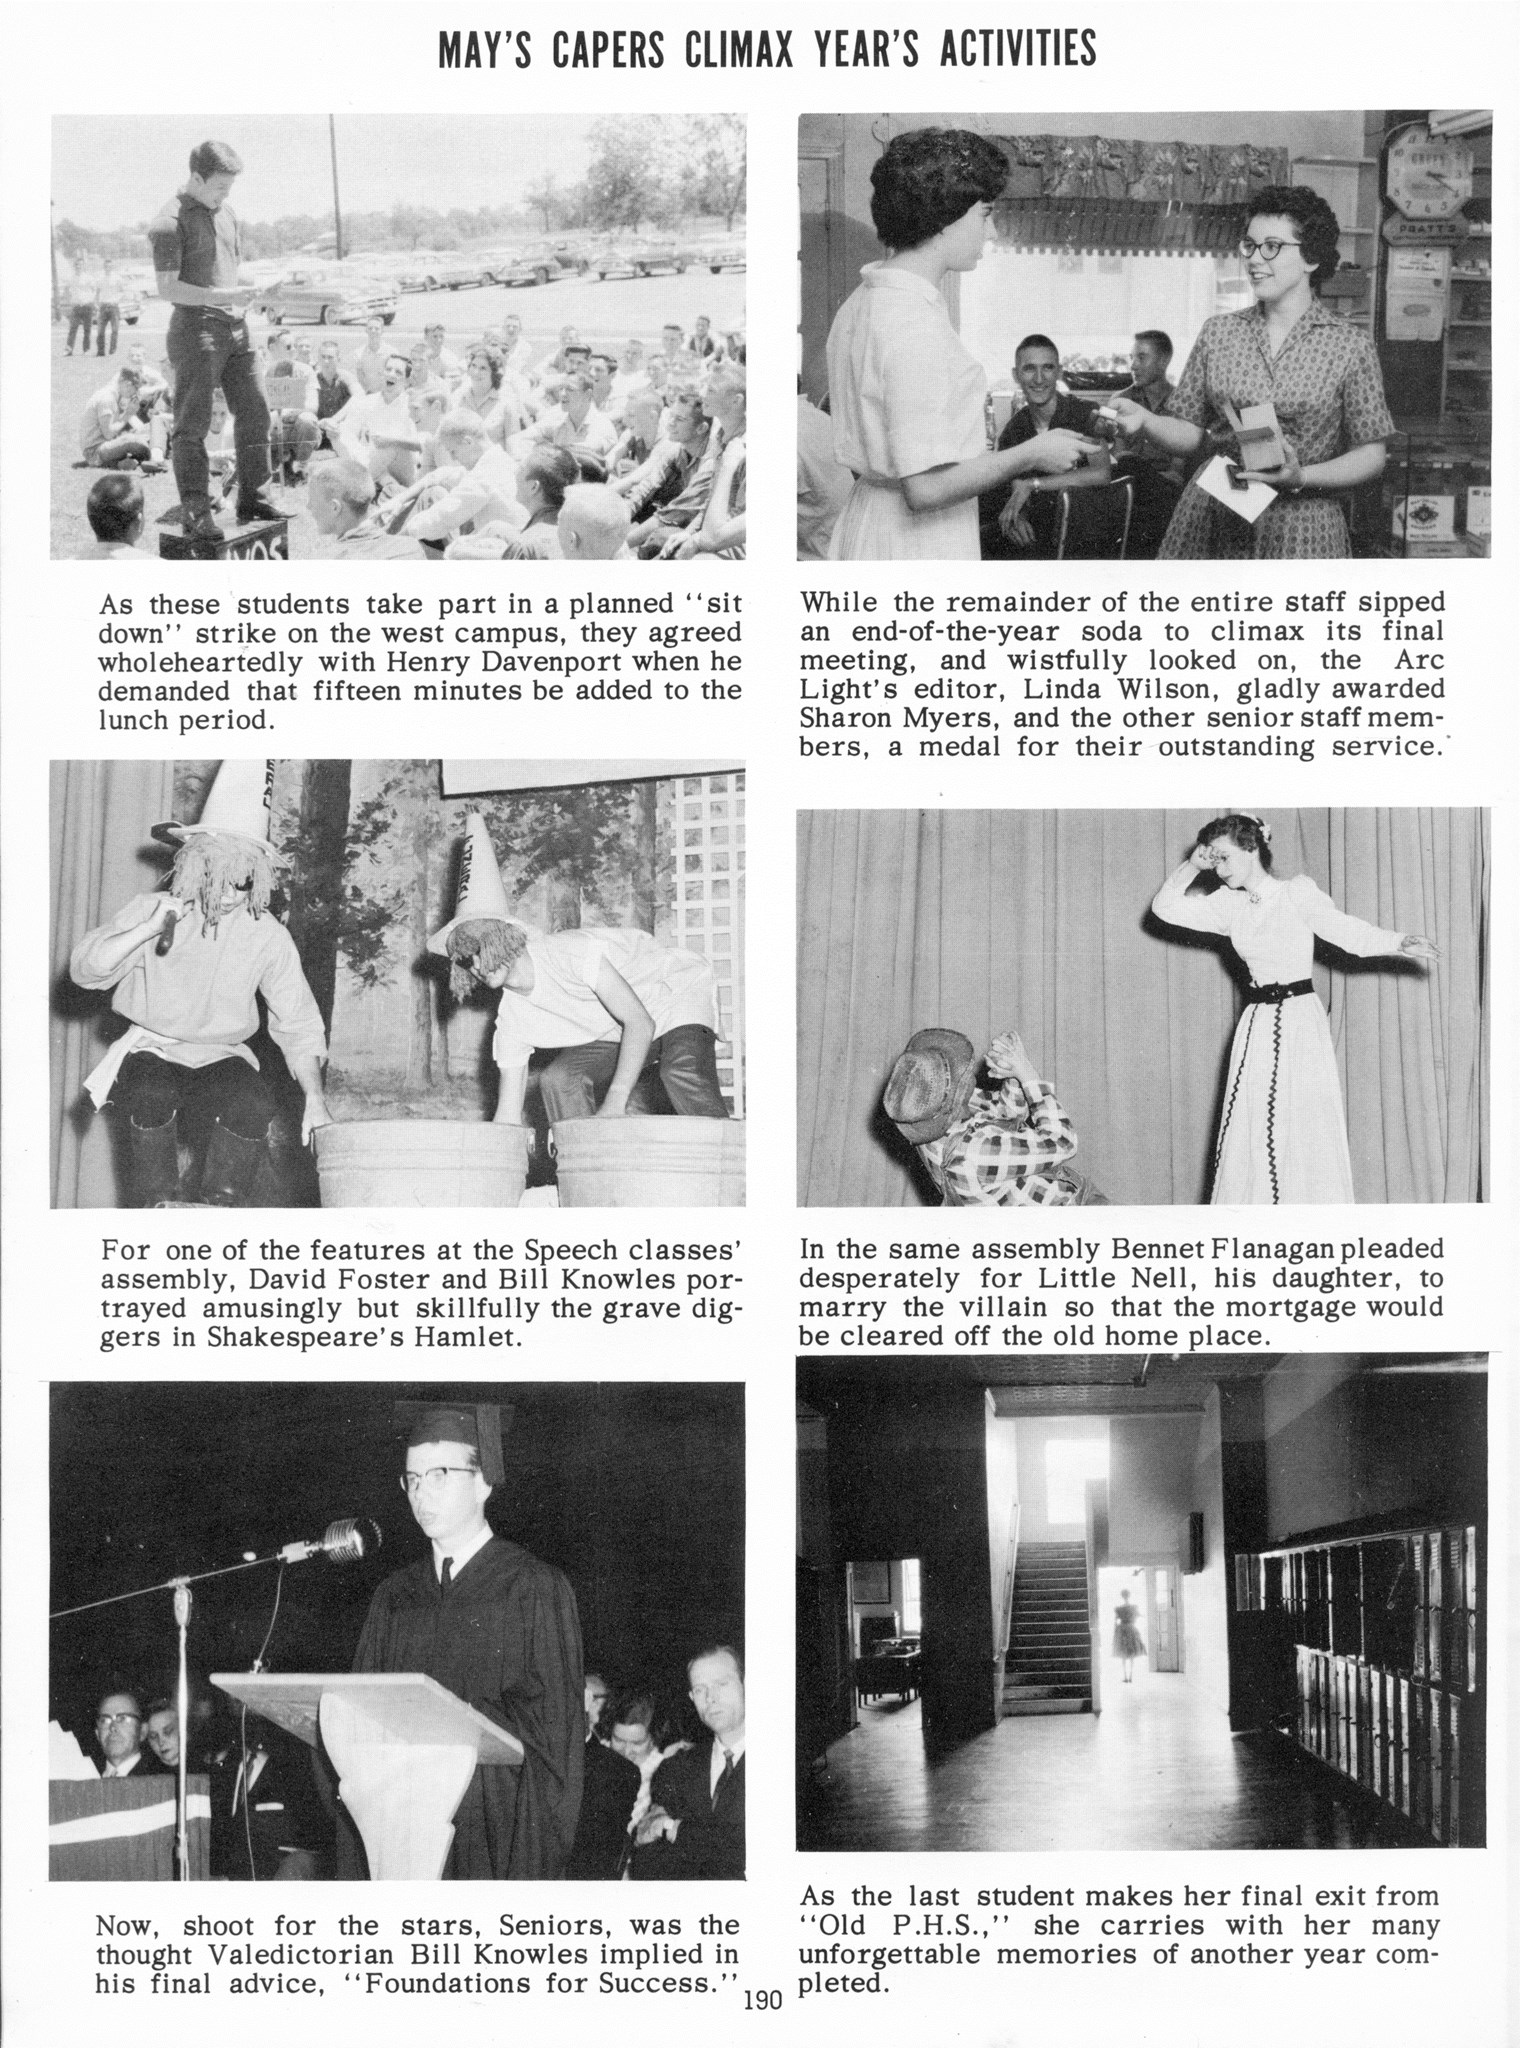 ../../../Images/Large/1960/Arclight-1960-pg0190.jpg